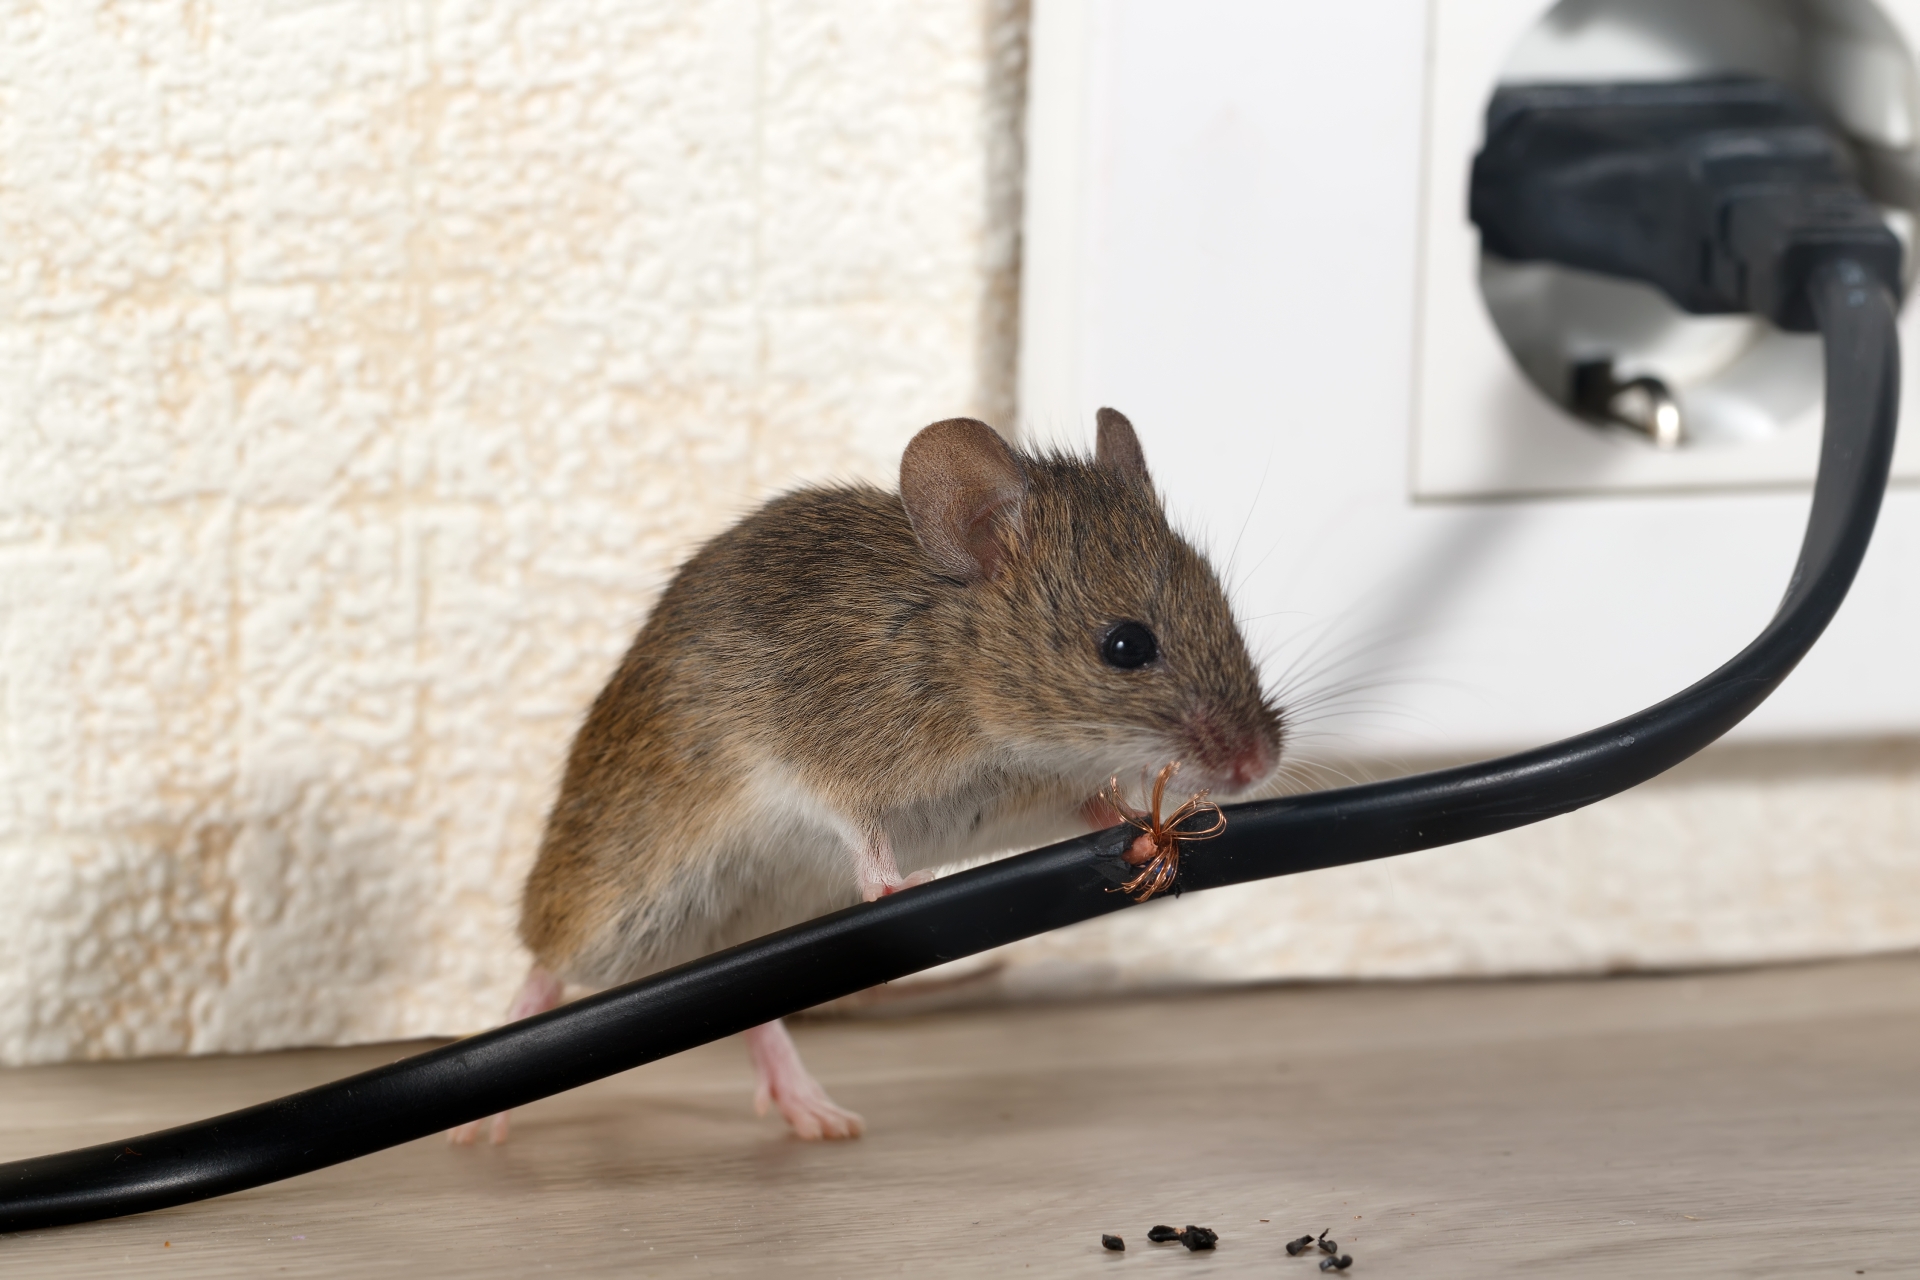 Mice Infestation, Pest Control in Staines-upon-Thames, Egham Hythe, TW18. Call Now 020 8166 9746